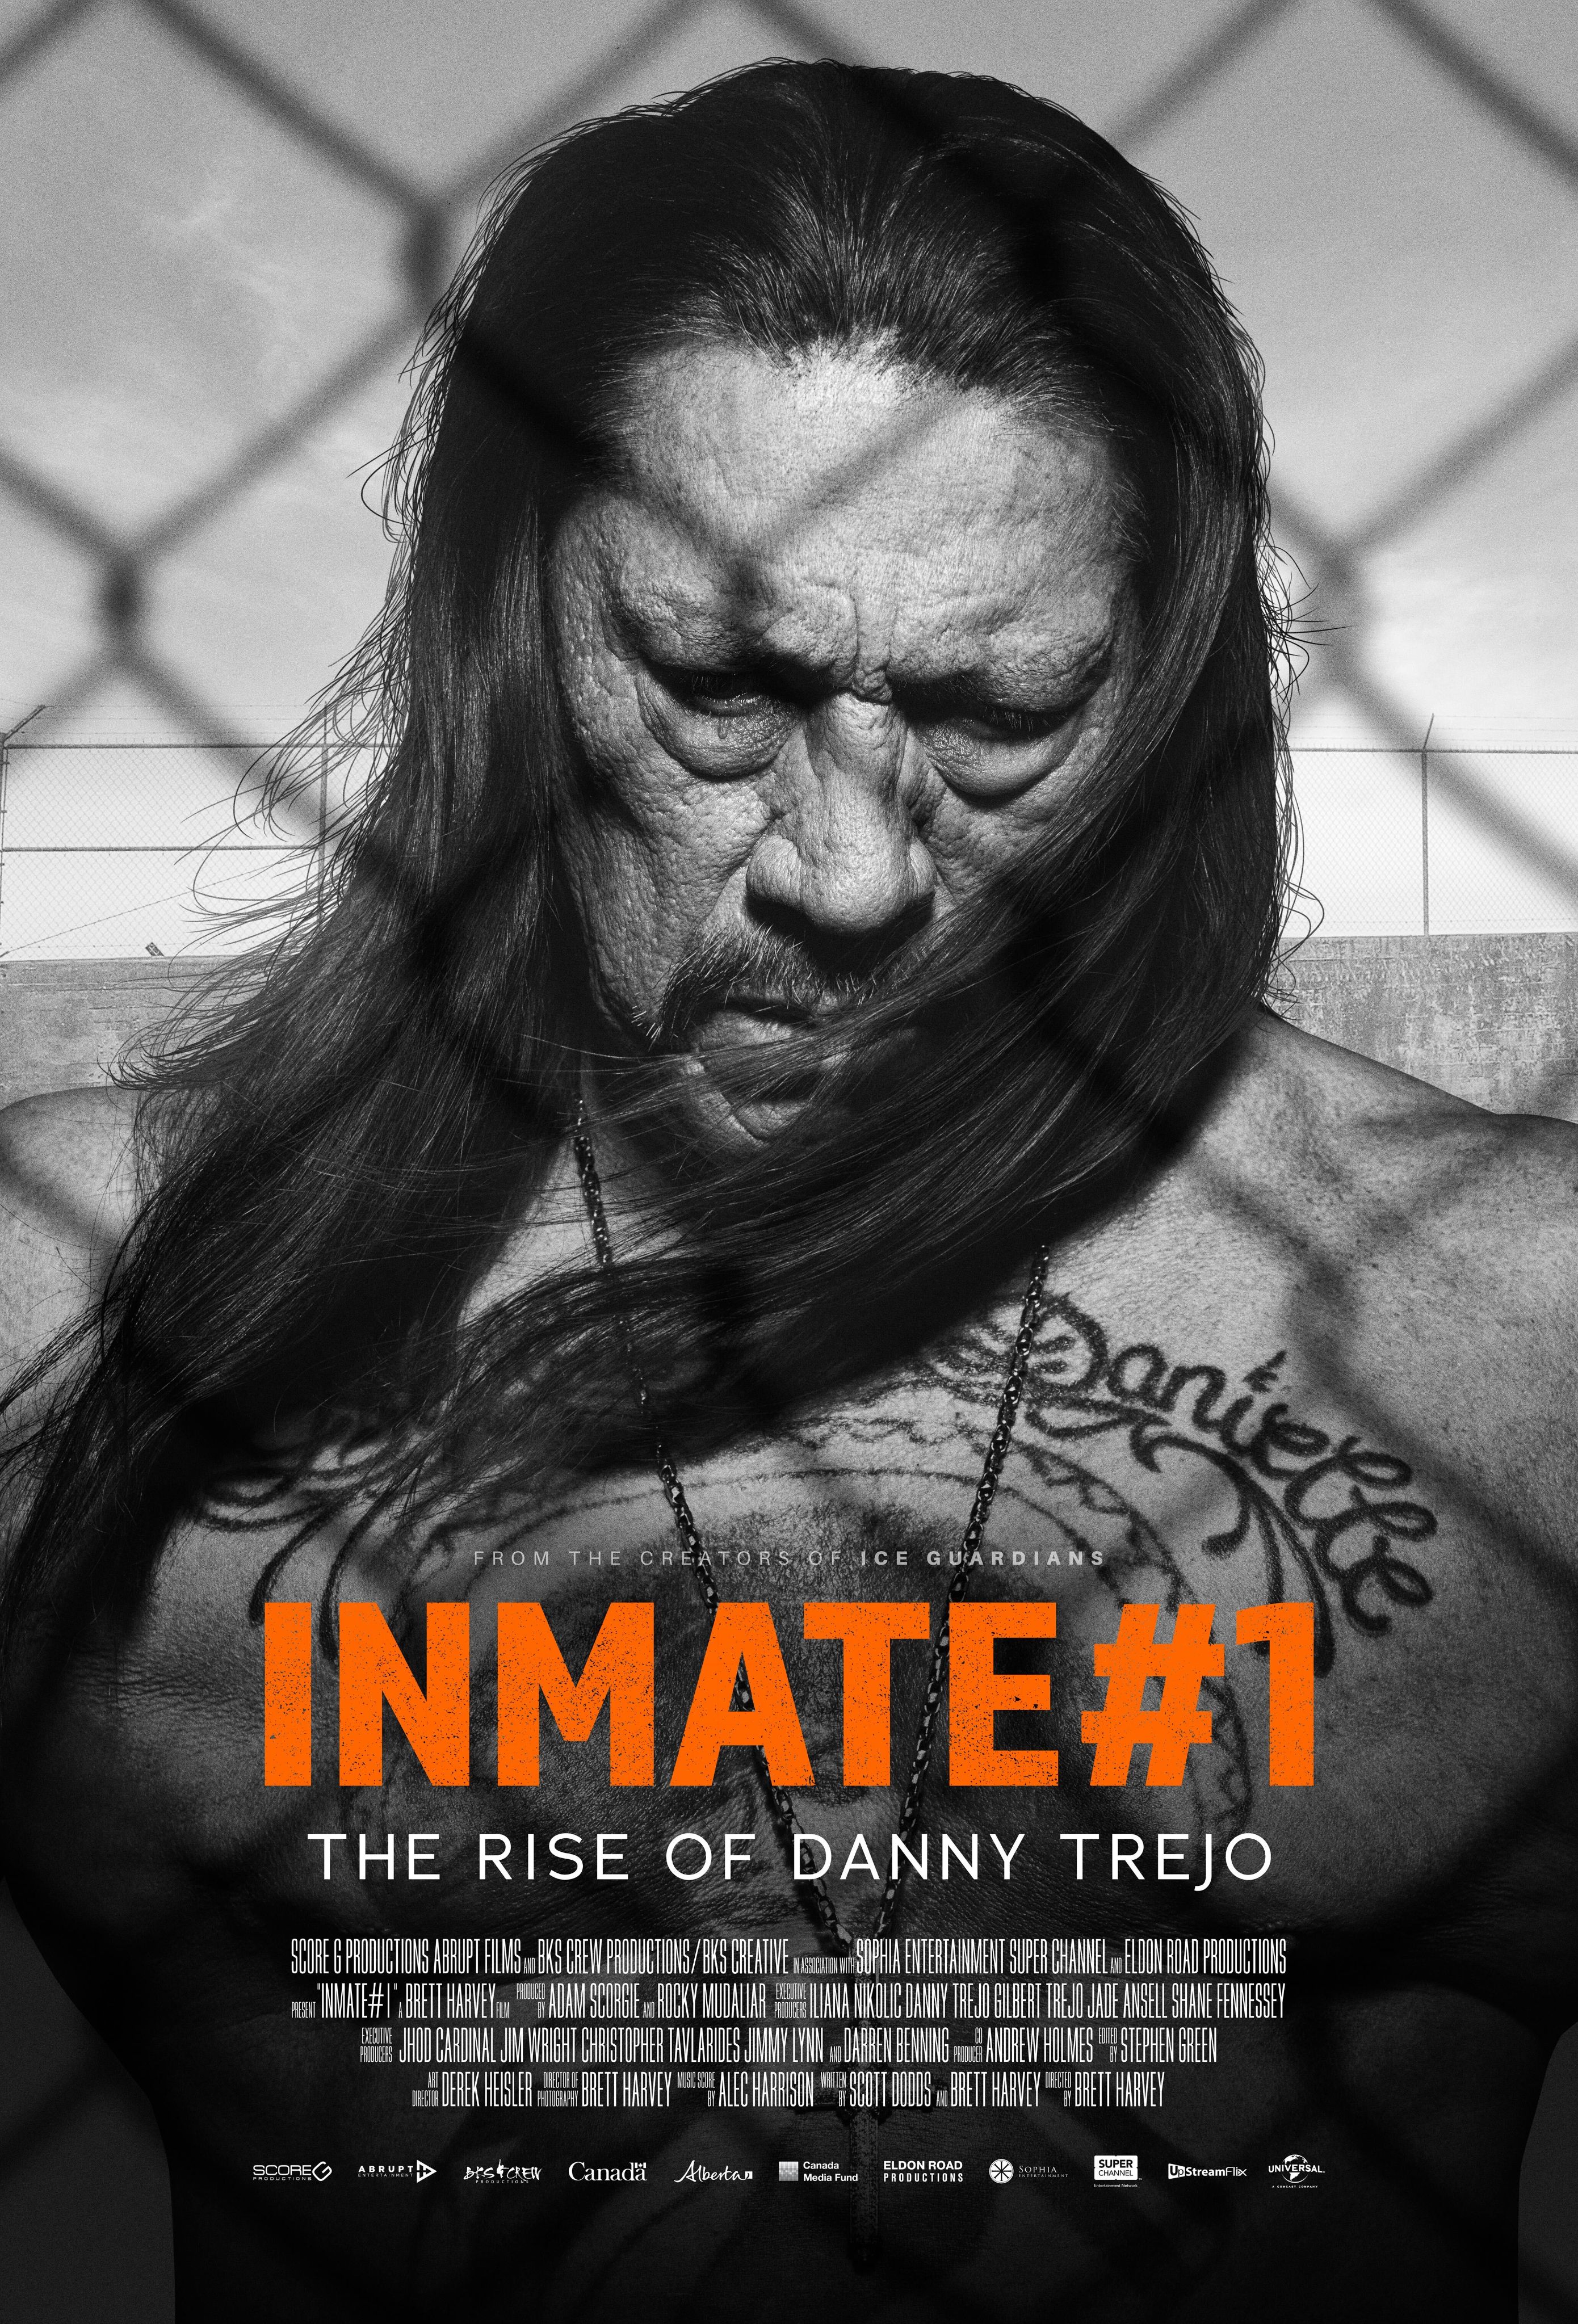 The Rise of Danny Trejo - Documentary Poster